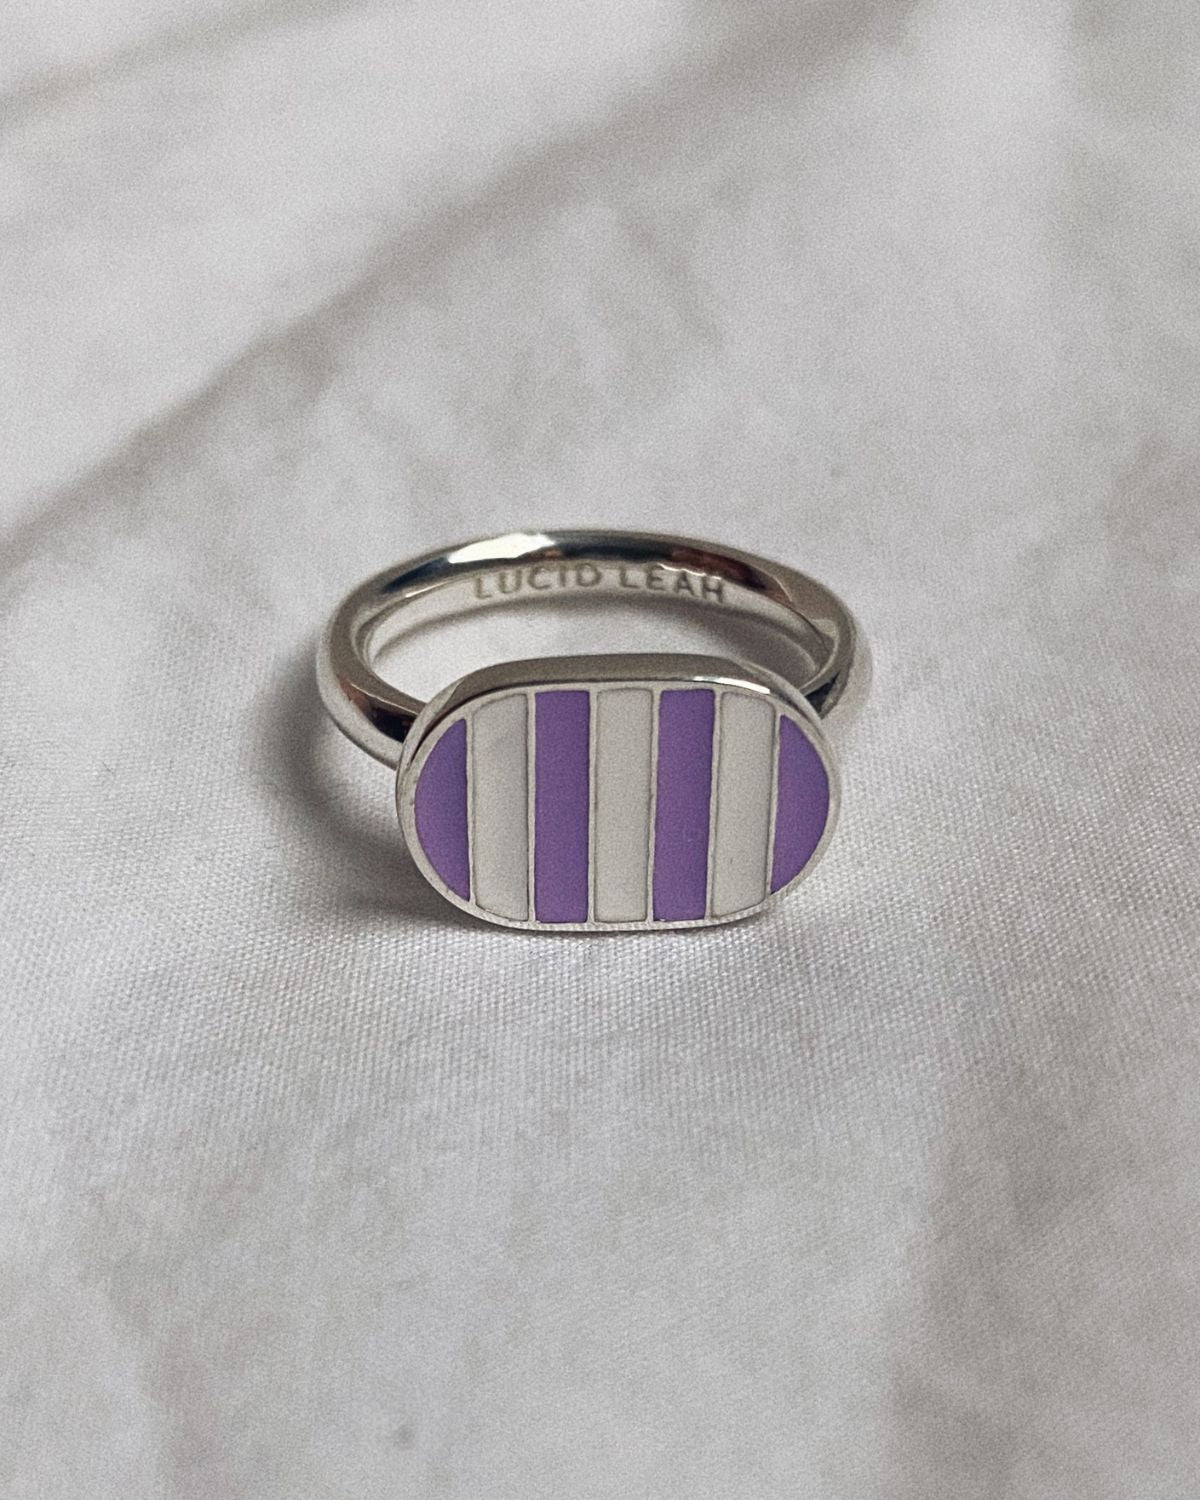 Busy bee ring - sterling silver